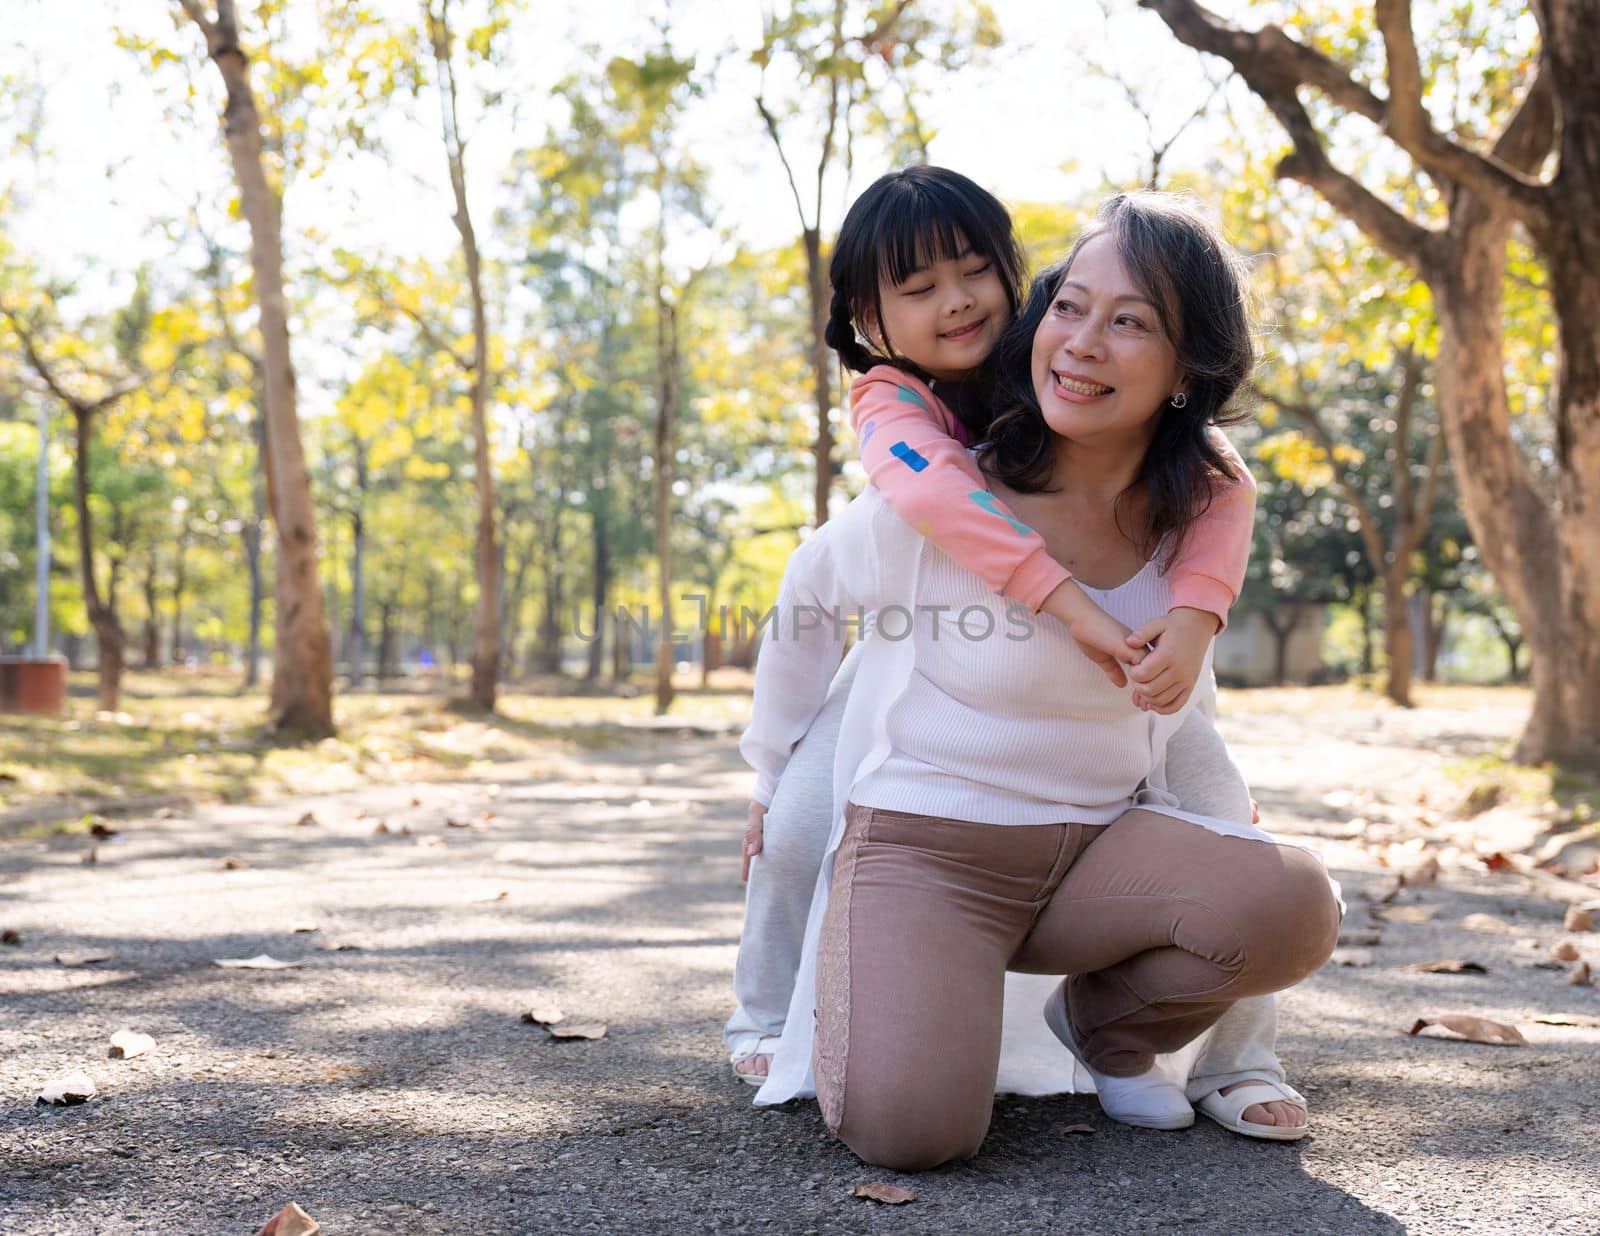 Happy grandmother and grandchild walking in public park.